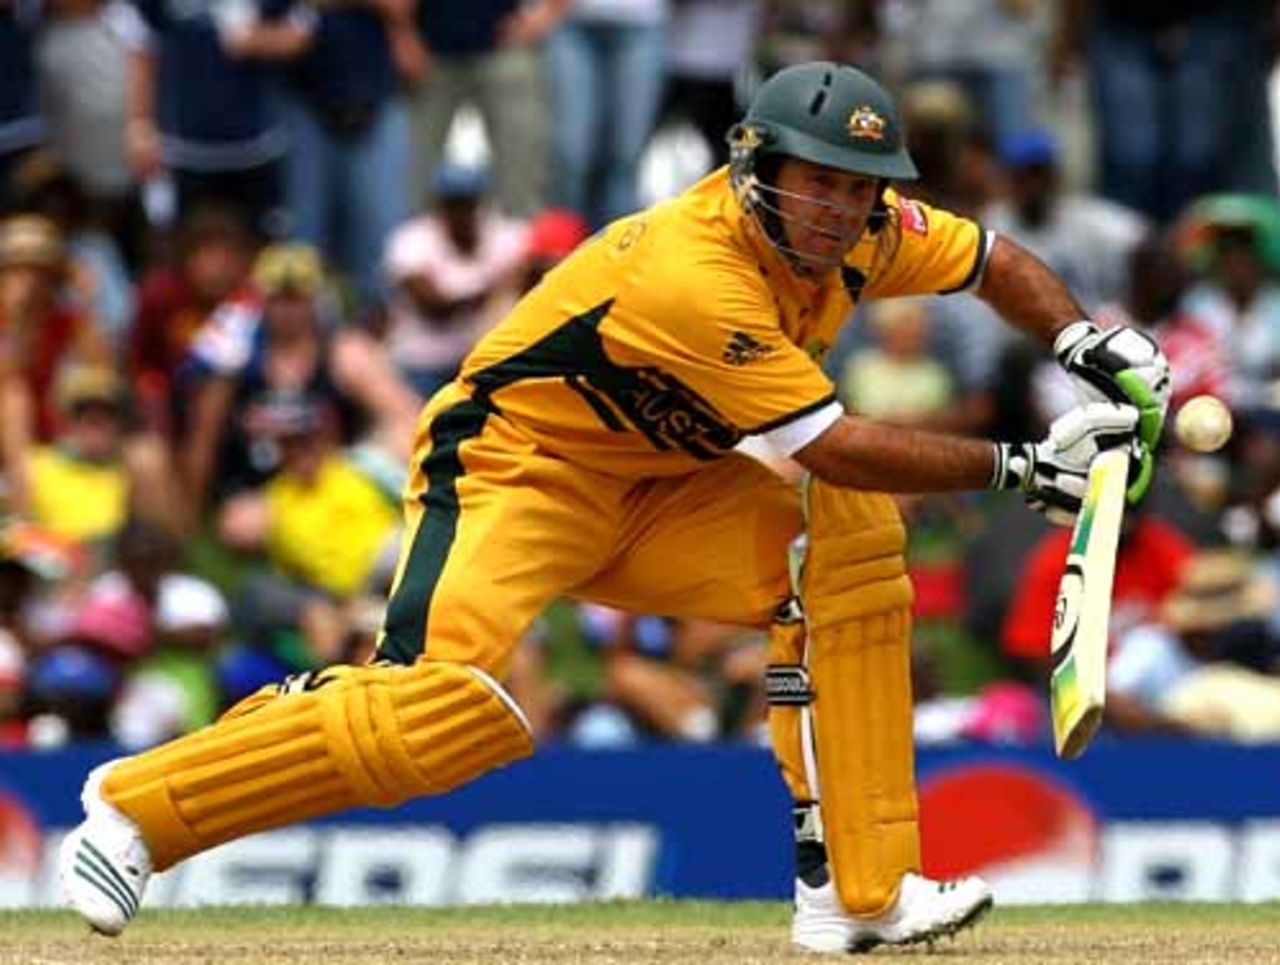 Ricky Ponting drives on his way to his fourth World Cup century, Australia v Scotland, Group A, Basseterre, 2007 World Cup, March 14, 2007